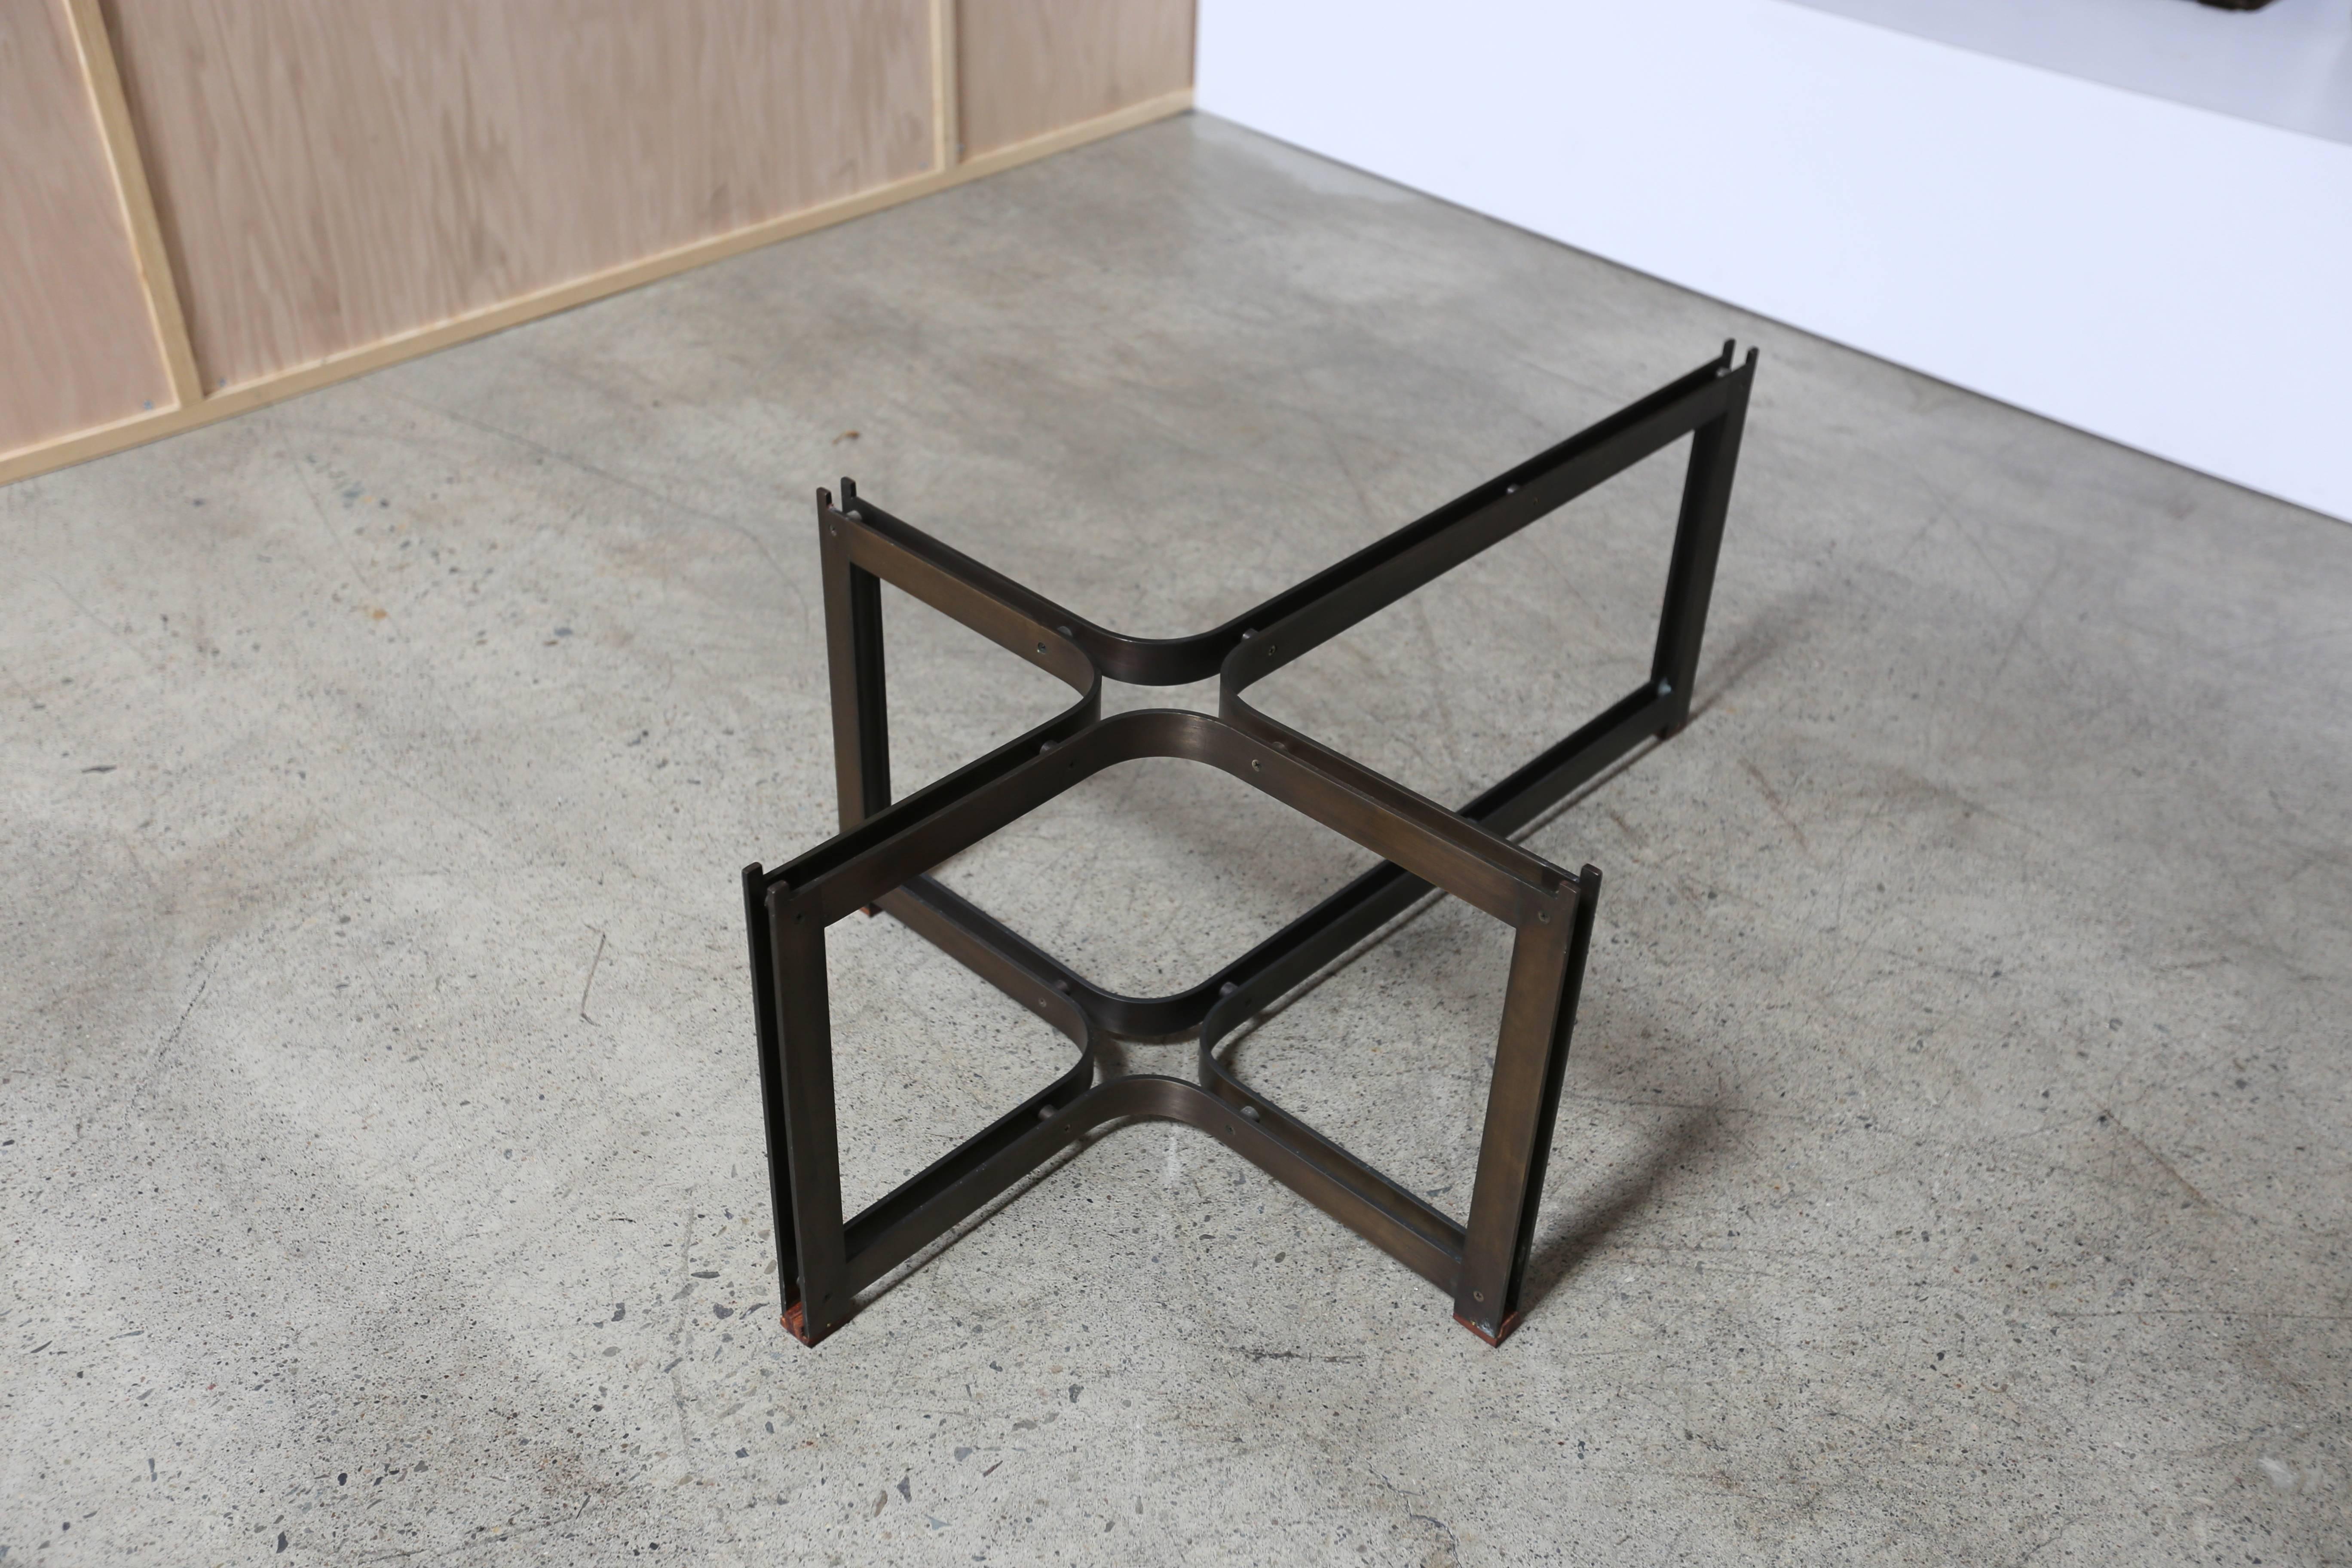 20th Century Bronze, Rosewood and Smoked Glass Coffee Table by Tom Lopinski For Dunbar